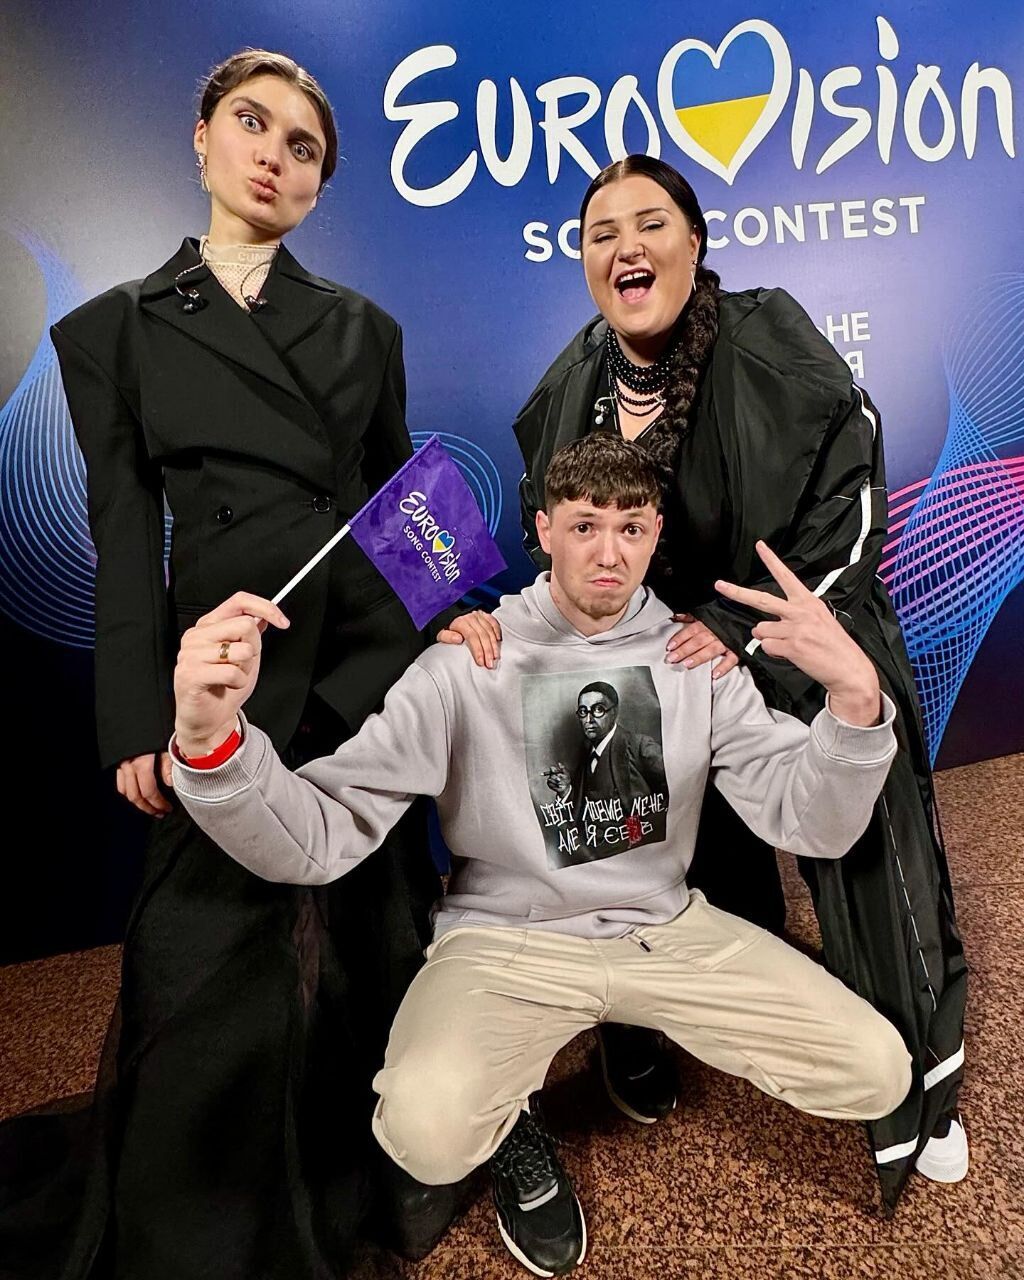 Alyona alyona and Jerry Hail vs MELOVIN: photos from the rehearsal of the main contenders for Eurovision 2024 from Ukraine have been posted online